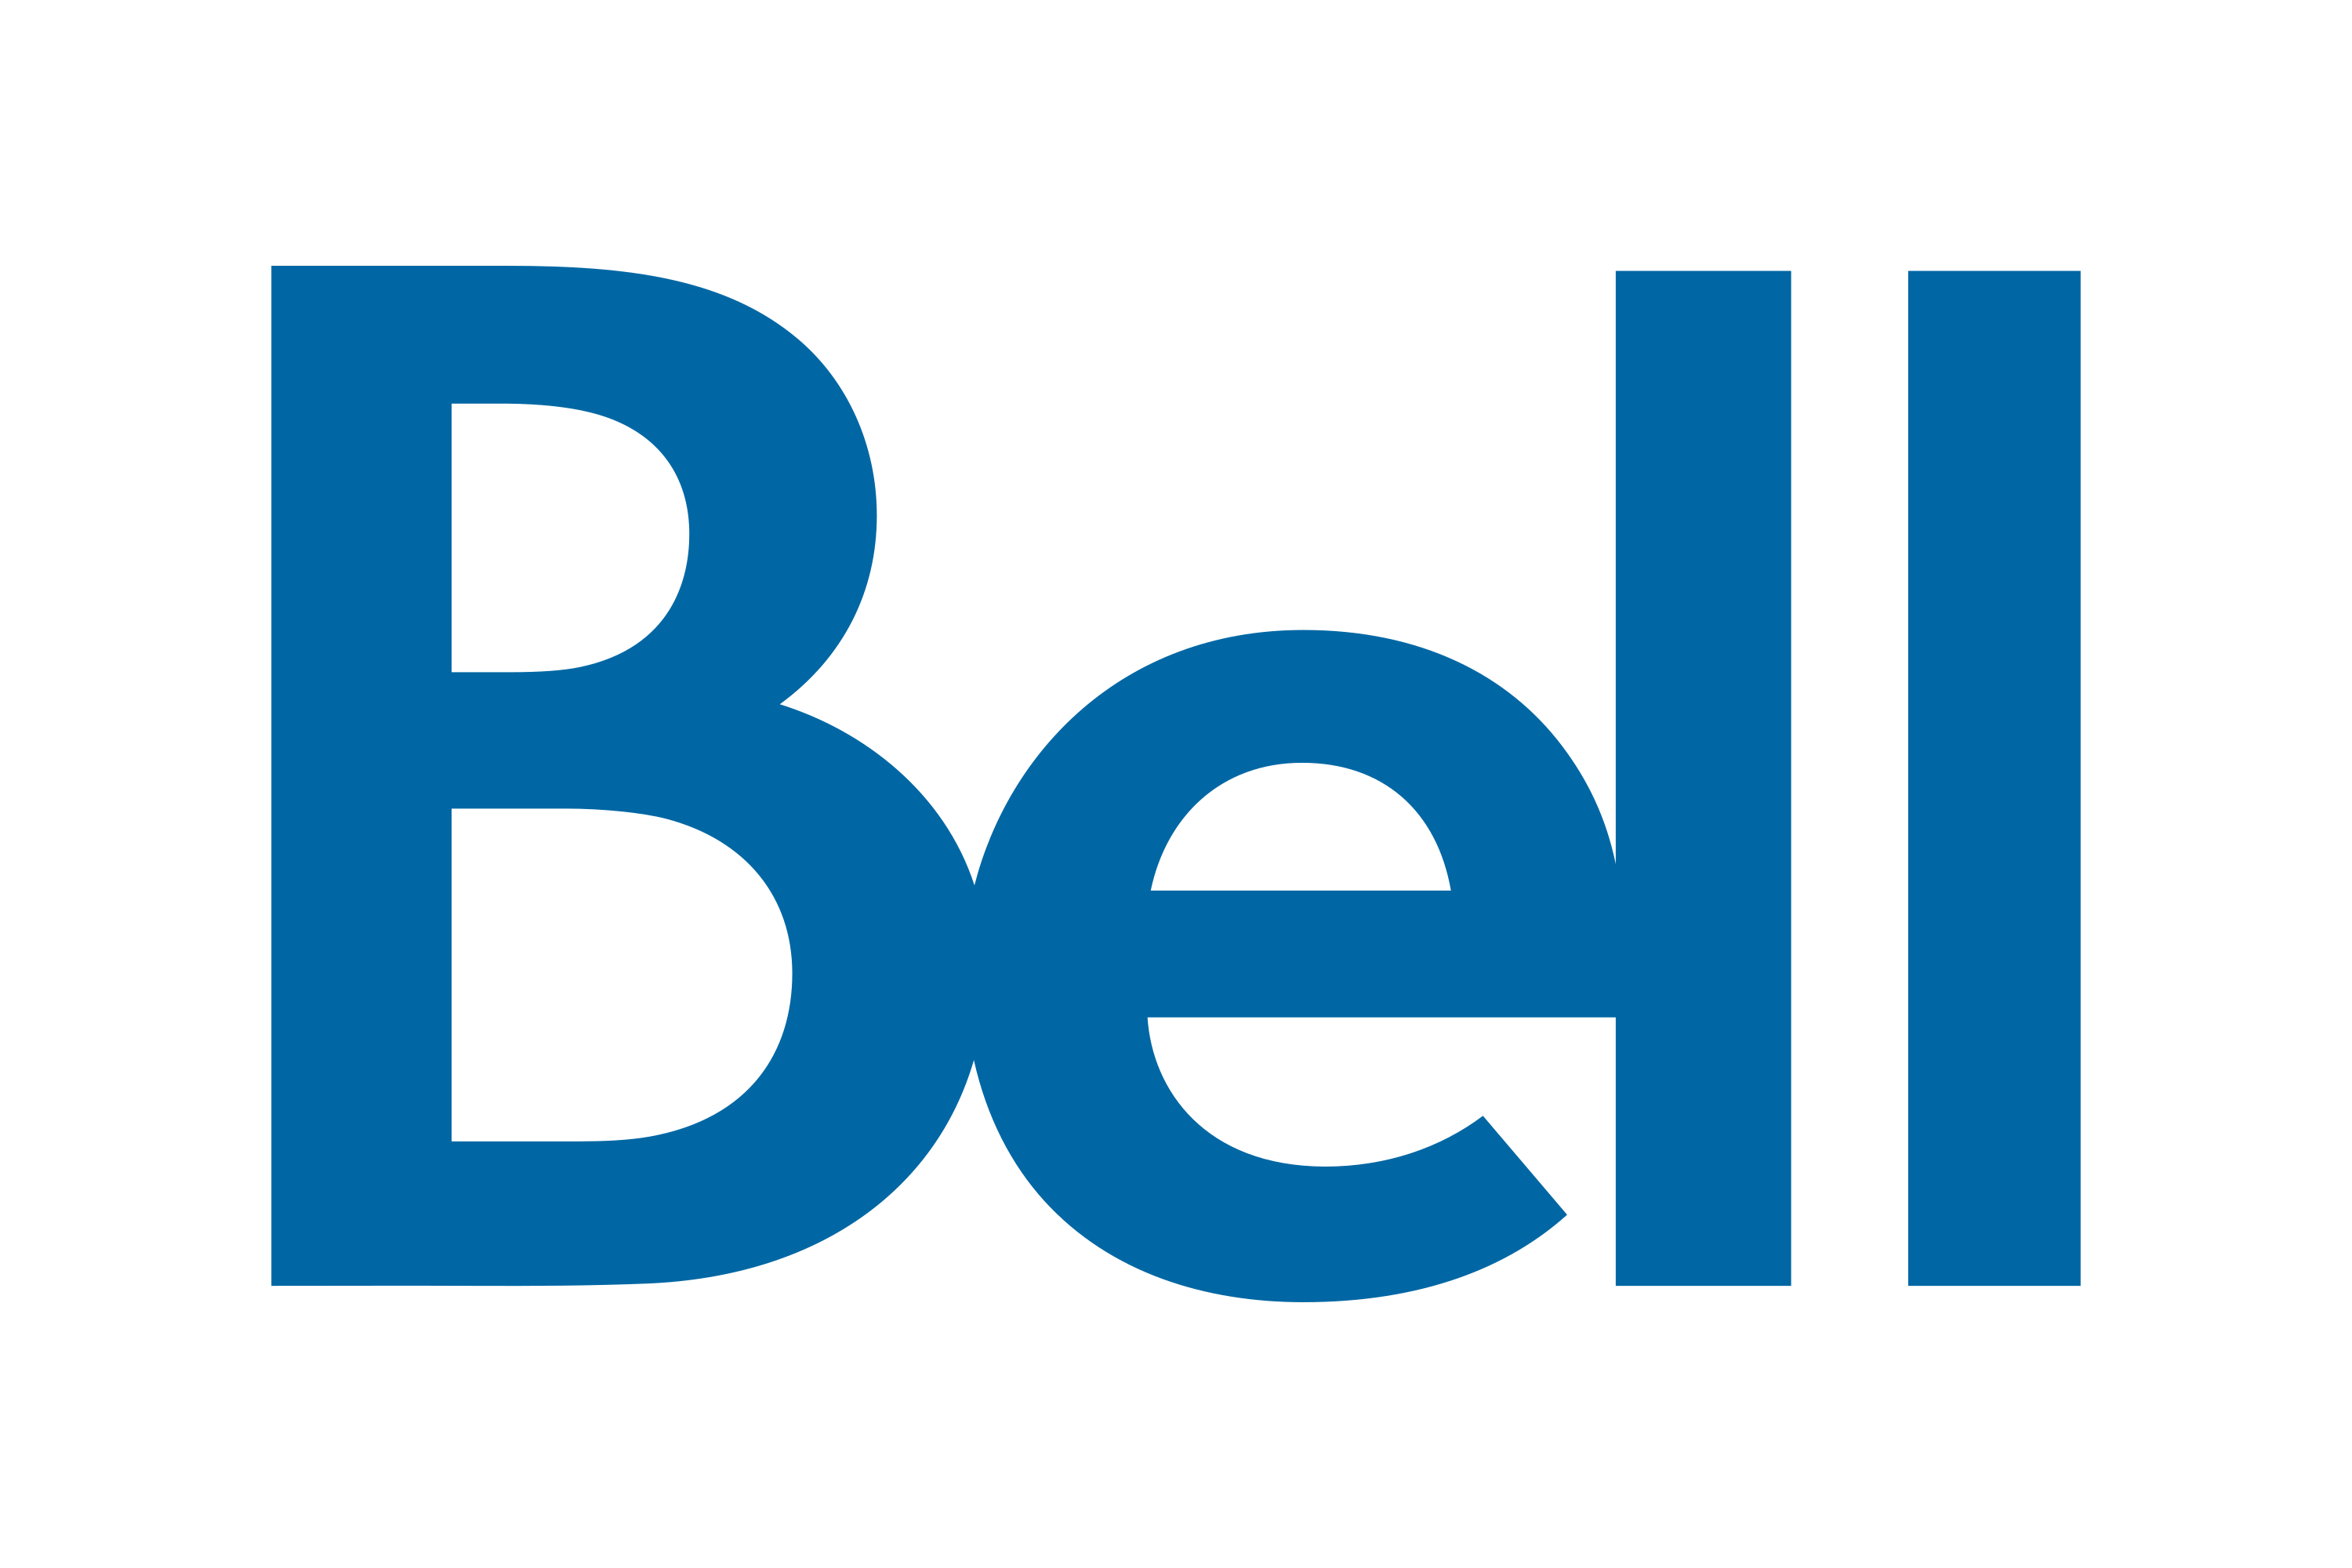 Bell logo. Subscribe to FPTV on Bell.